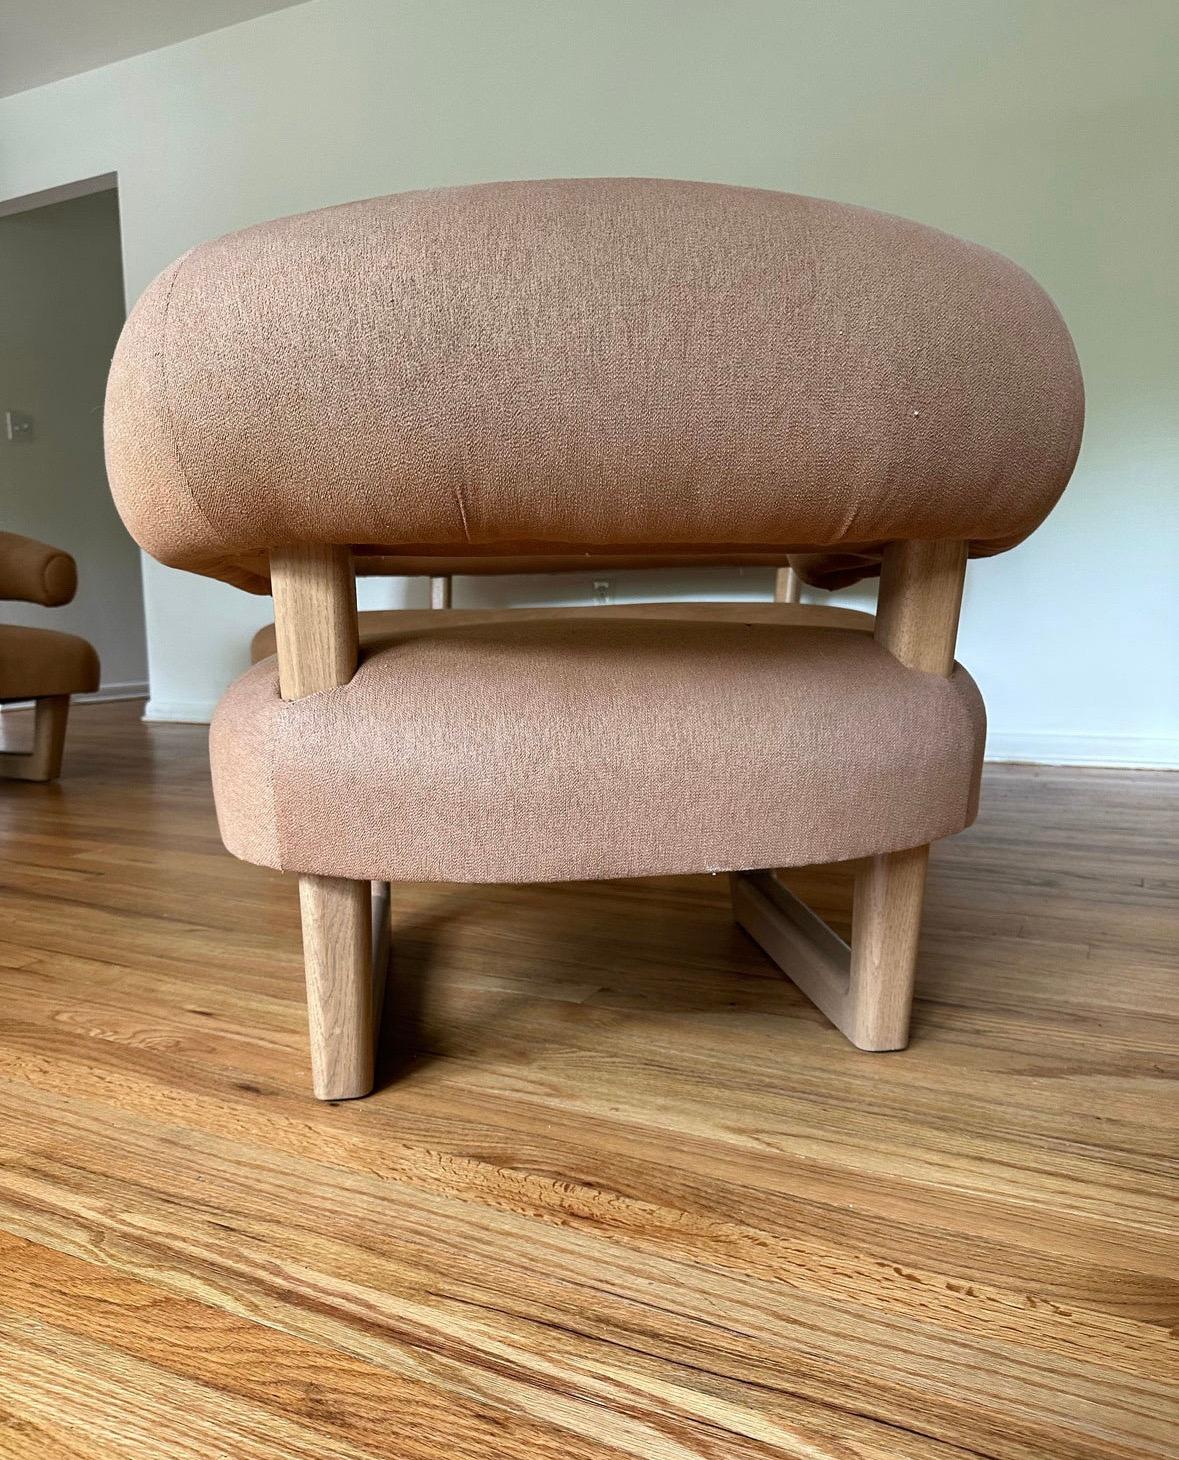 Pair of Armchairs by Peter Marino for the Getty Nyc French modernist organic  For Sale 1